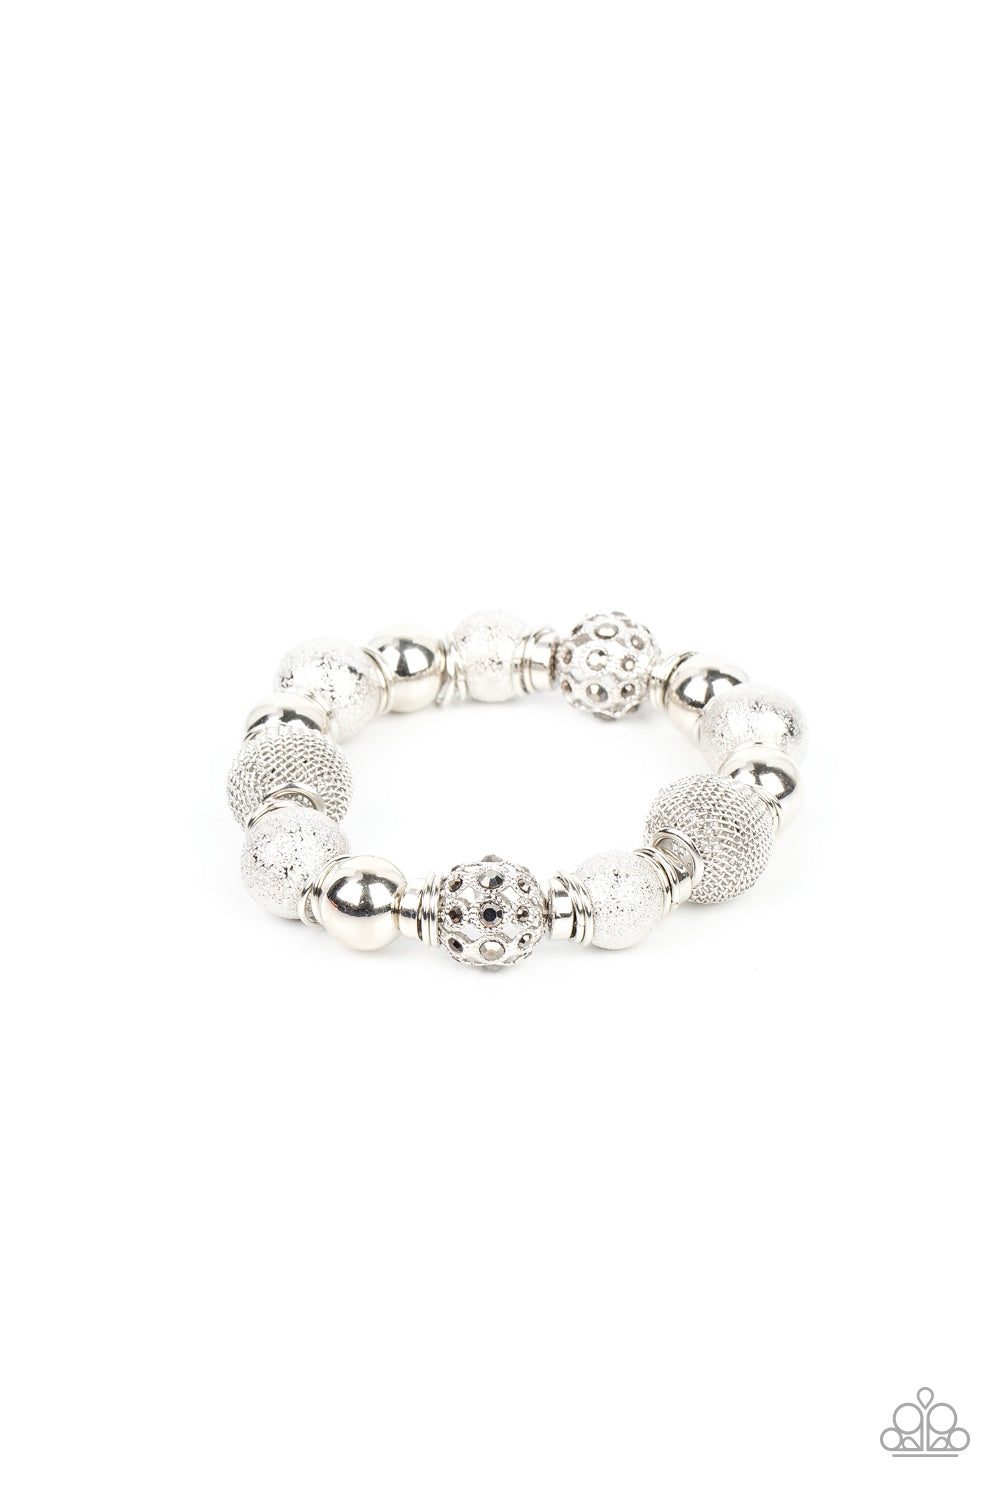 Paparazzi We Totally Mesh - Silver Bracelet - A Finishing Touch Jewelry